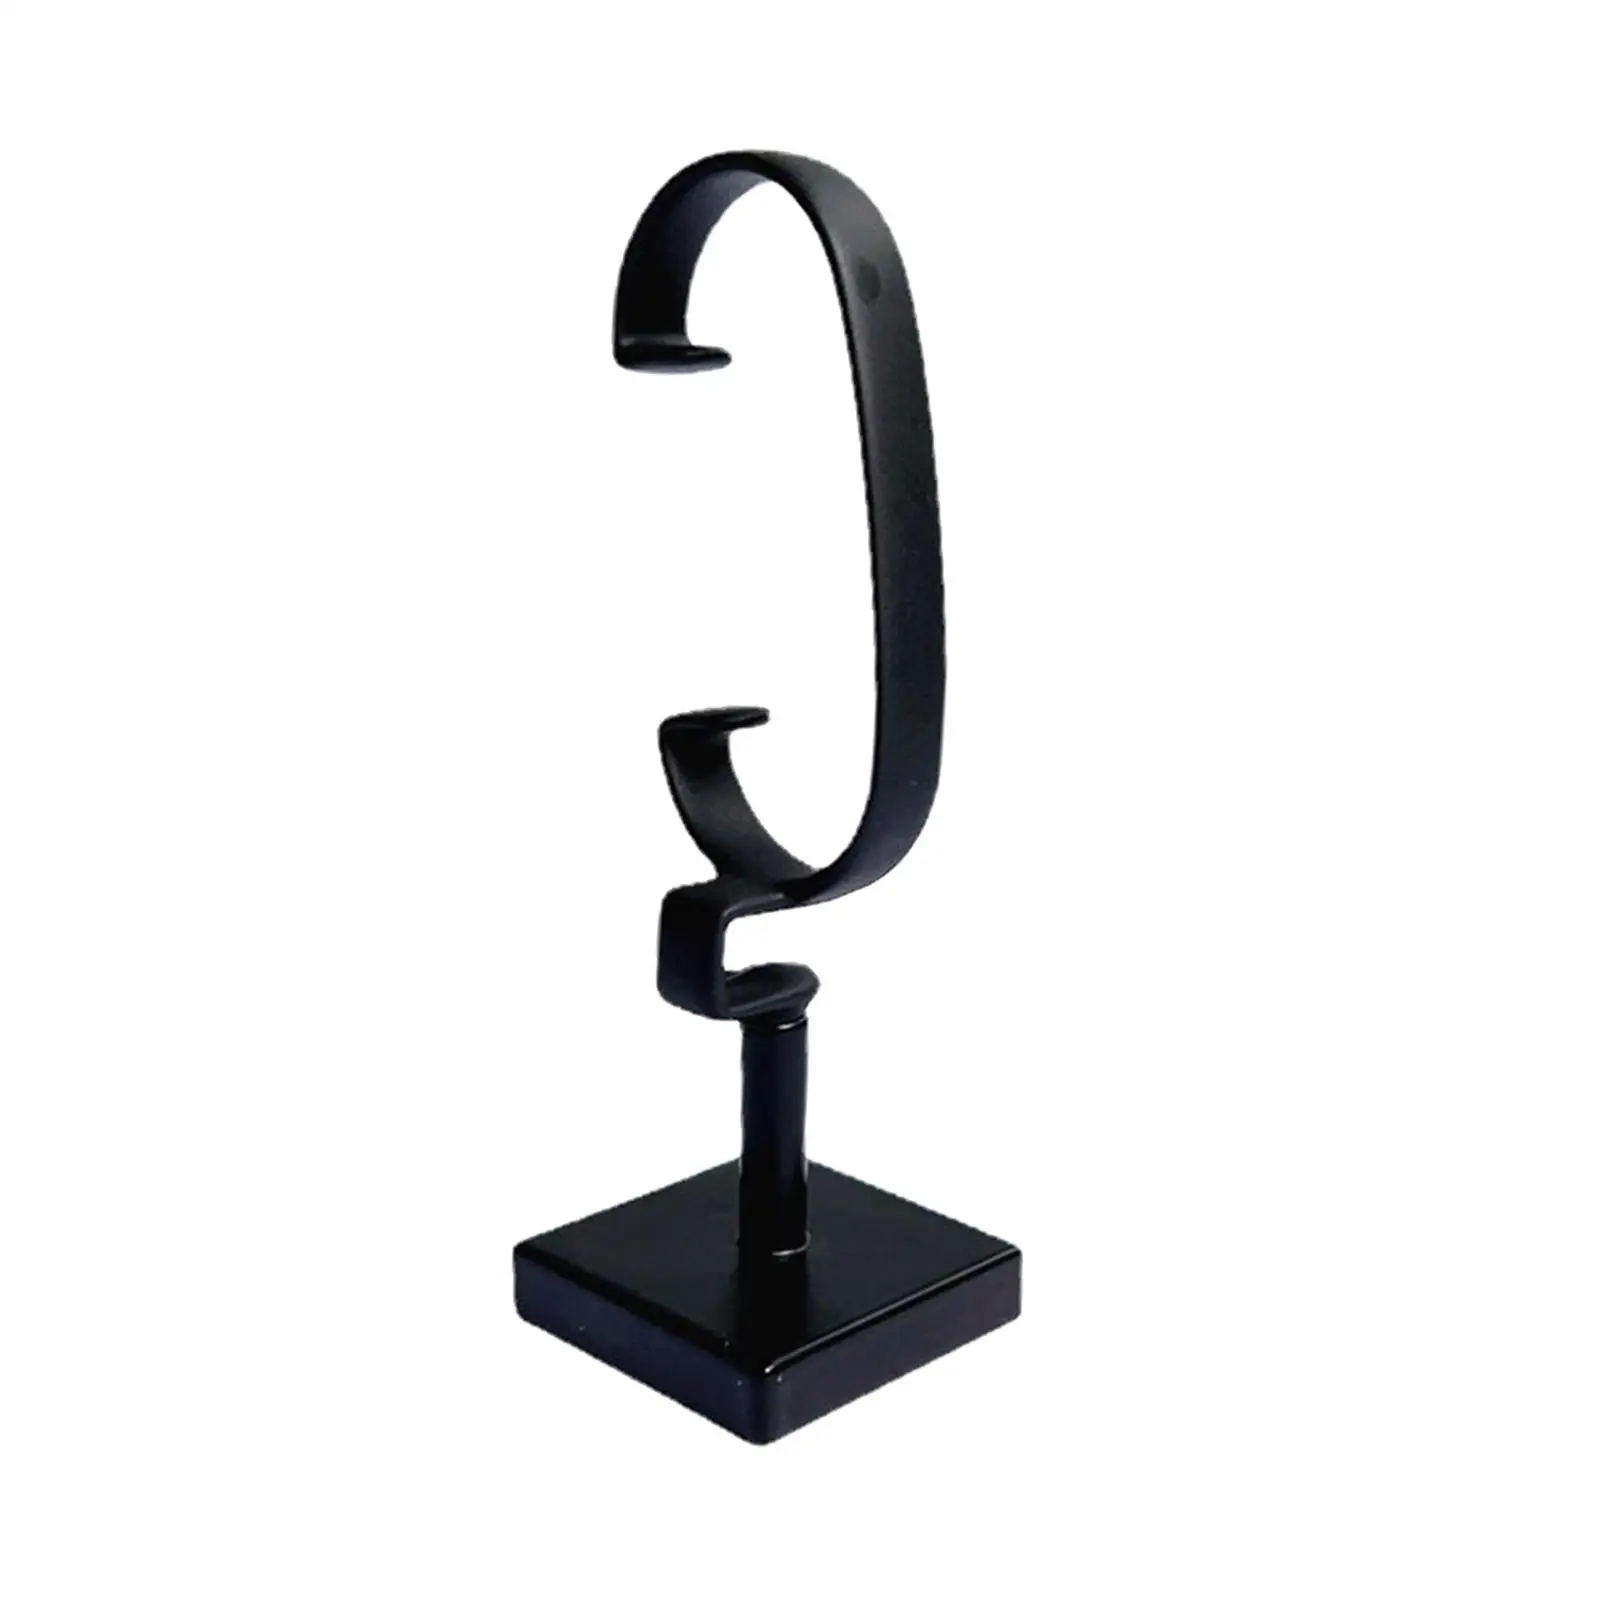 Durable Watch Display Stand Jewelry Organizer home decor Stable Bracelet Holder for Vanity Table Desktop Store Showcase